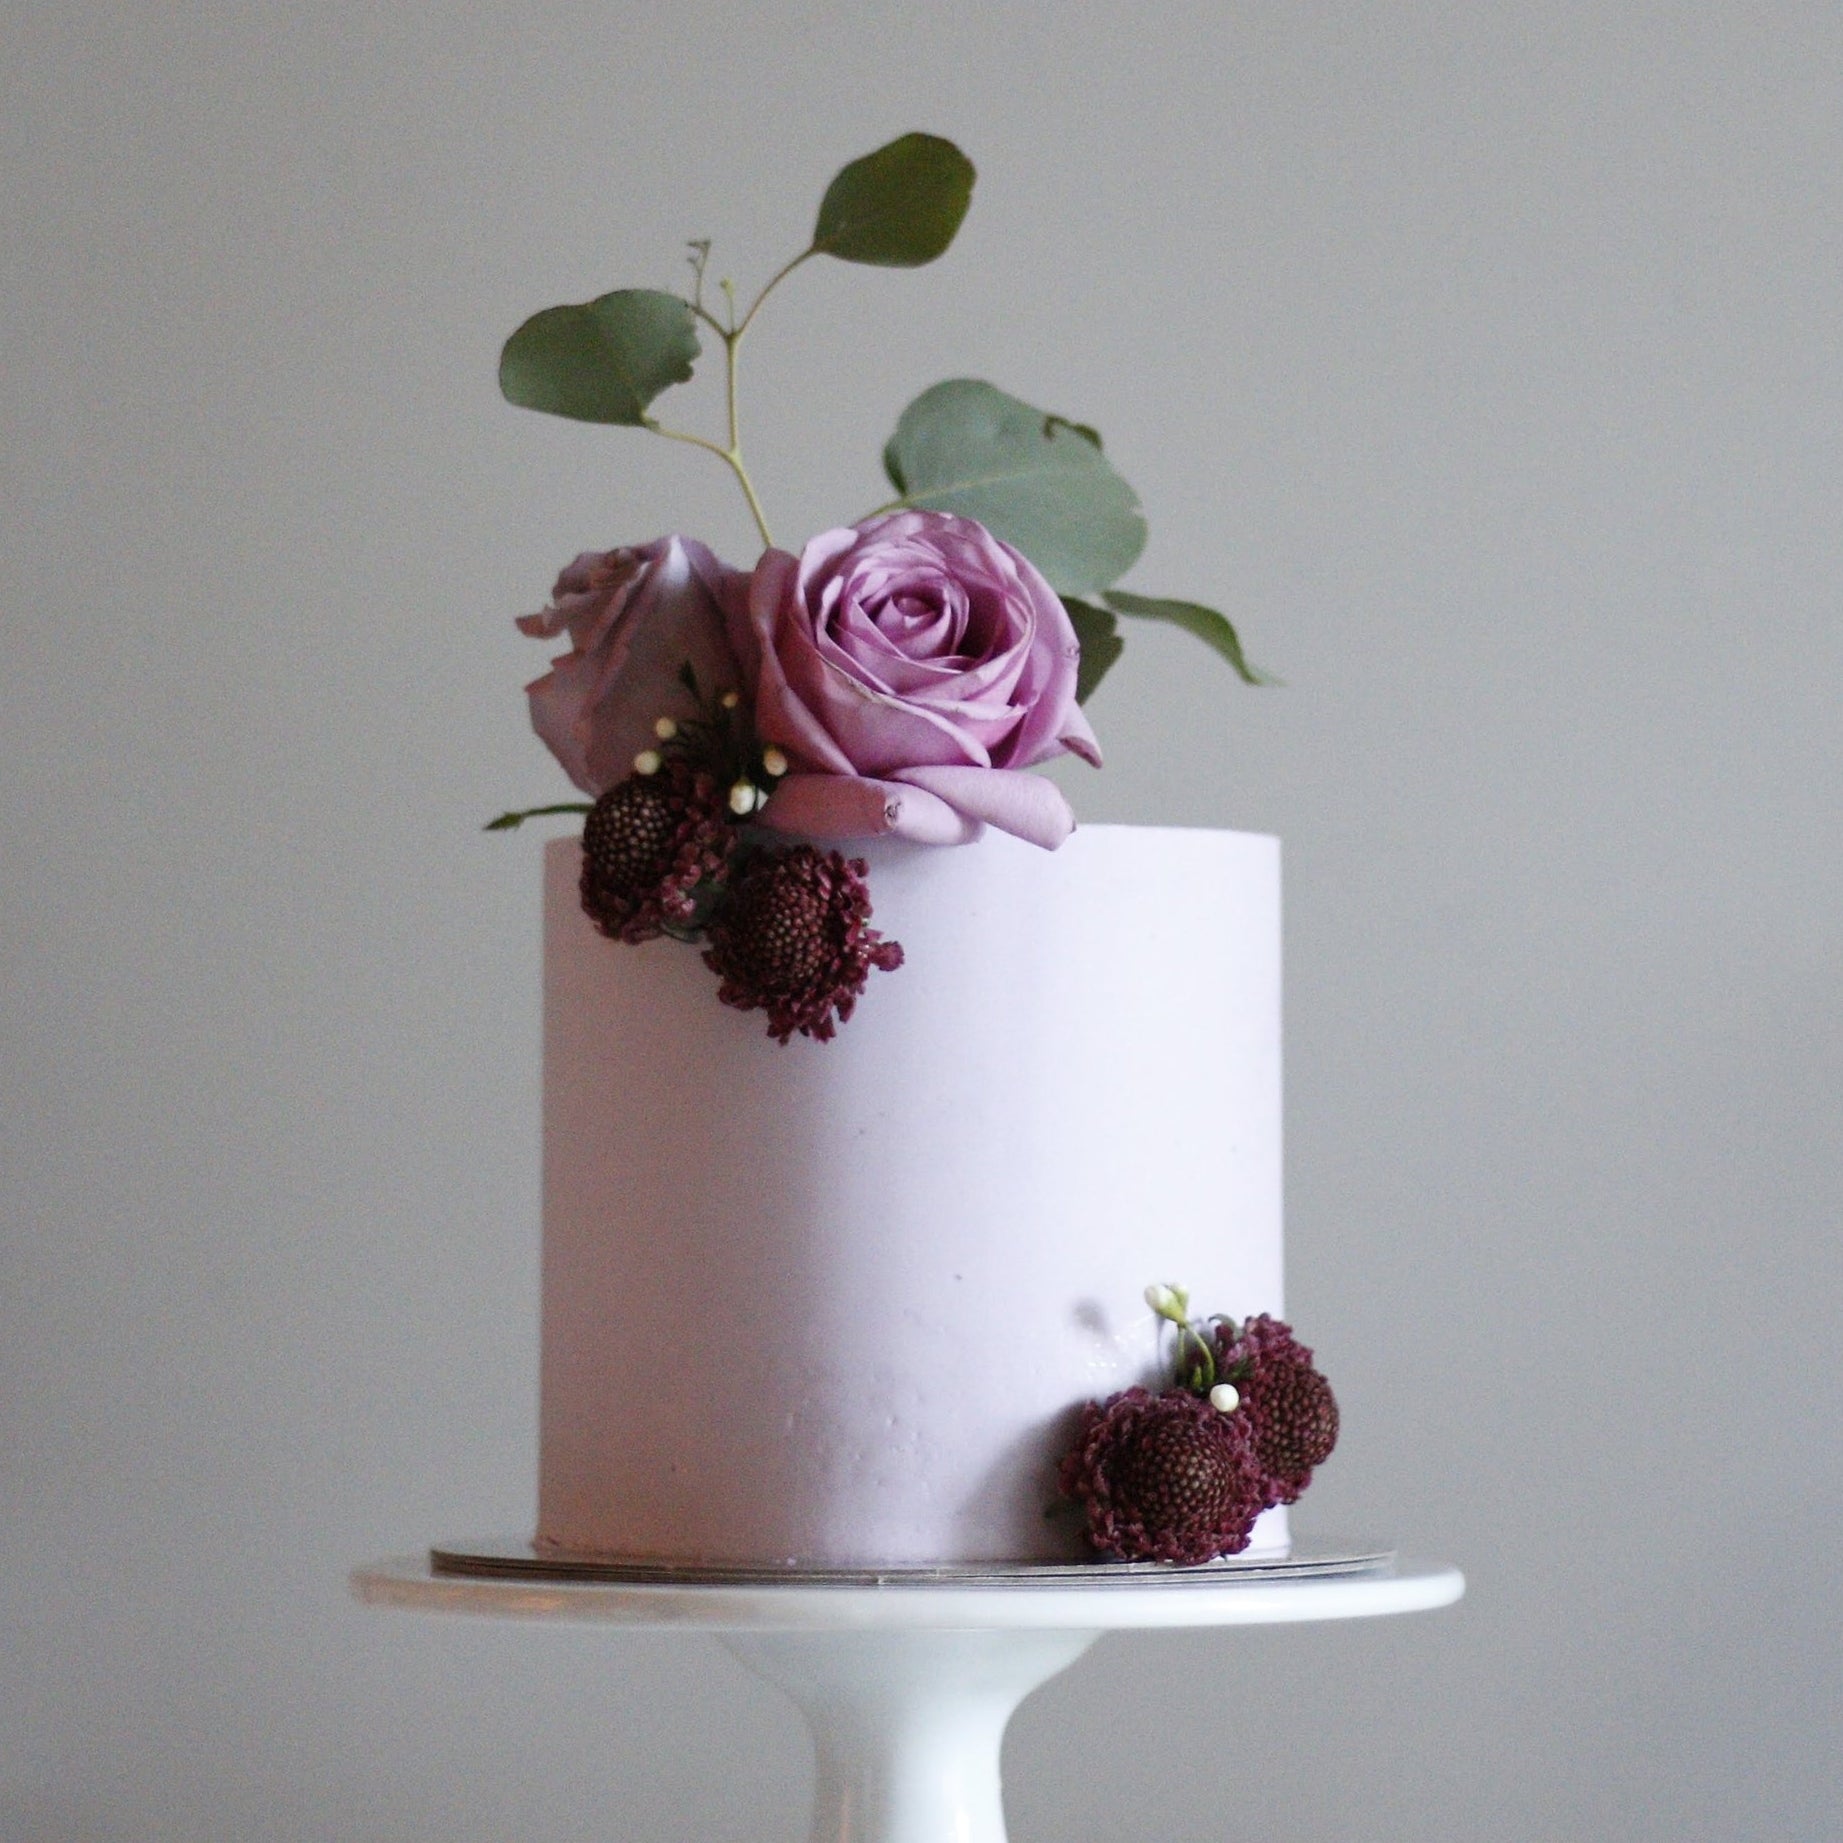 How to Decorate a Cake with Flowers | Fresh flower cake, Diy cake decorating  birthday, Flower cake